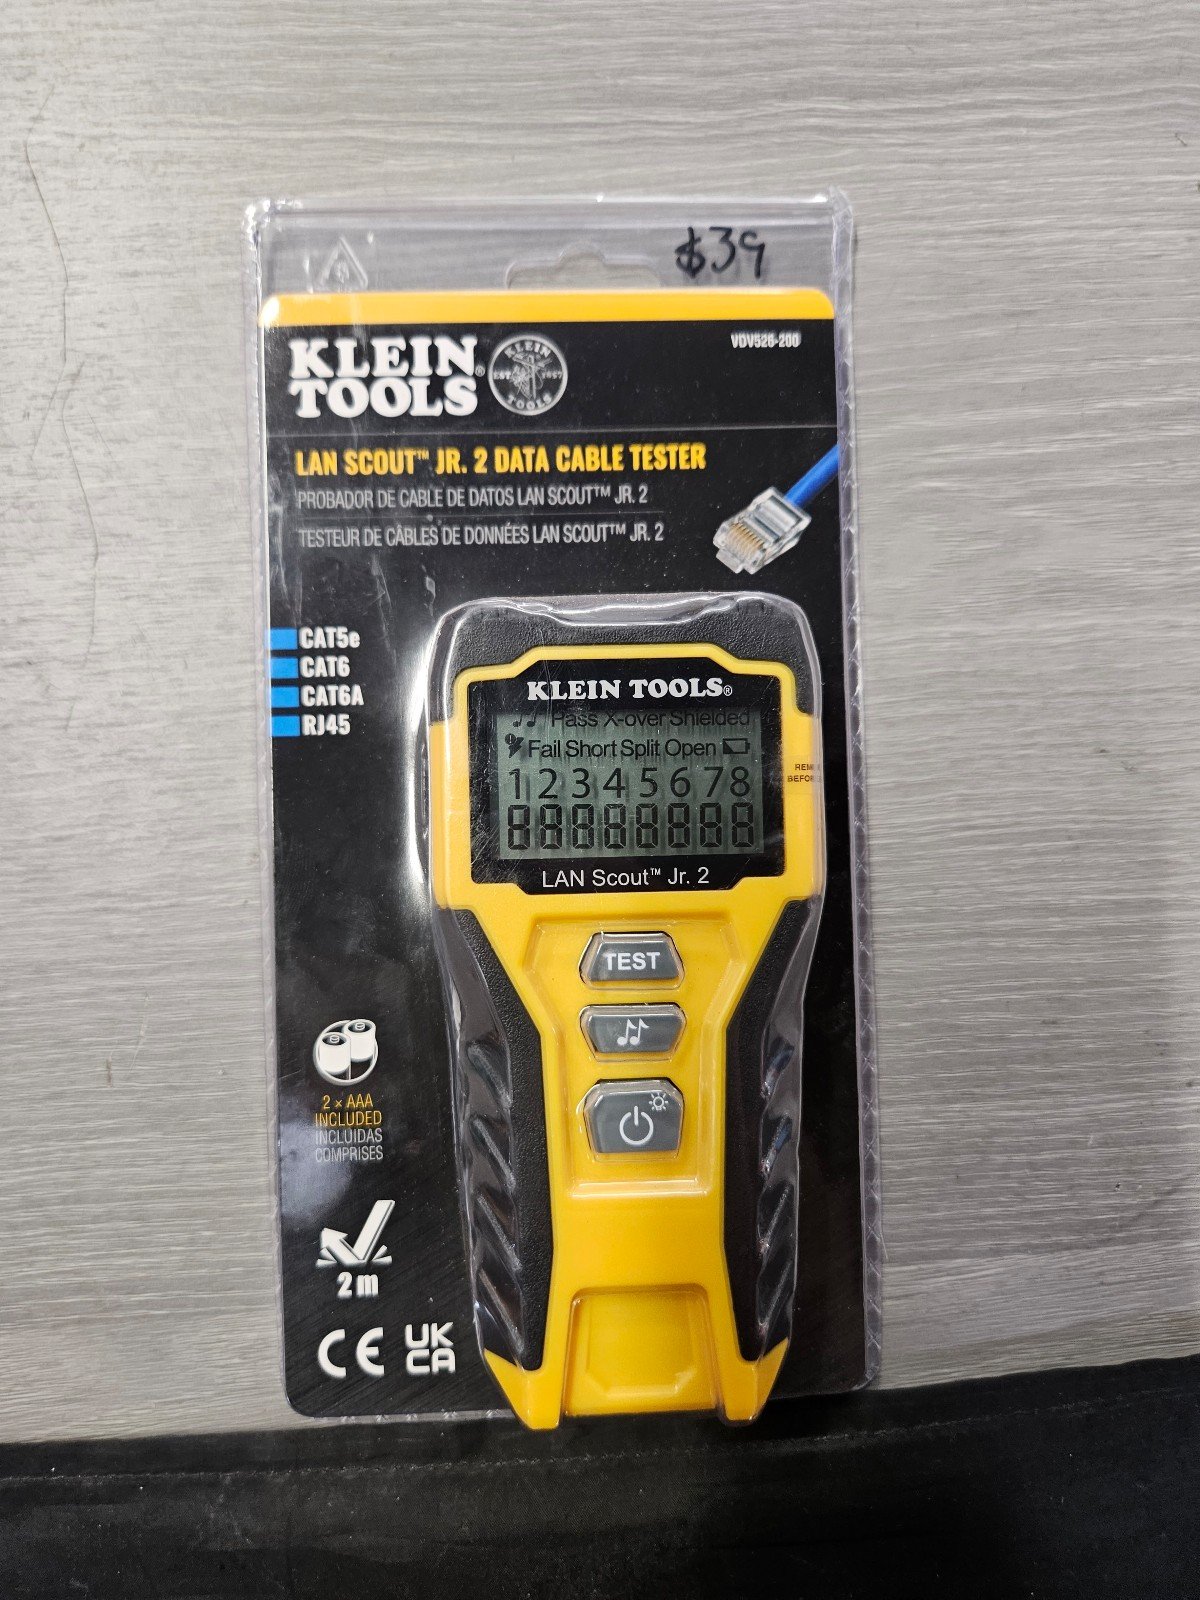 Klein Tools
Lan Scout Jr. Cable Tester aswzEso0c